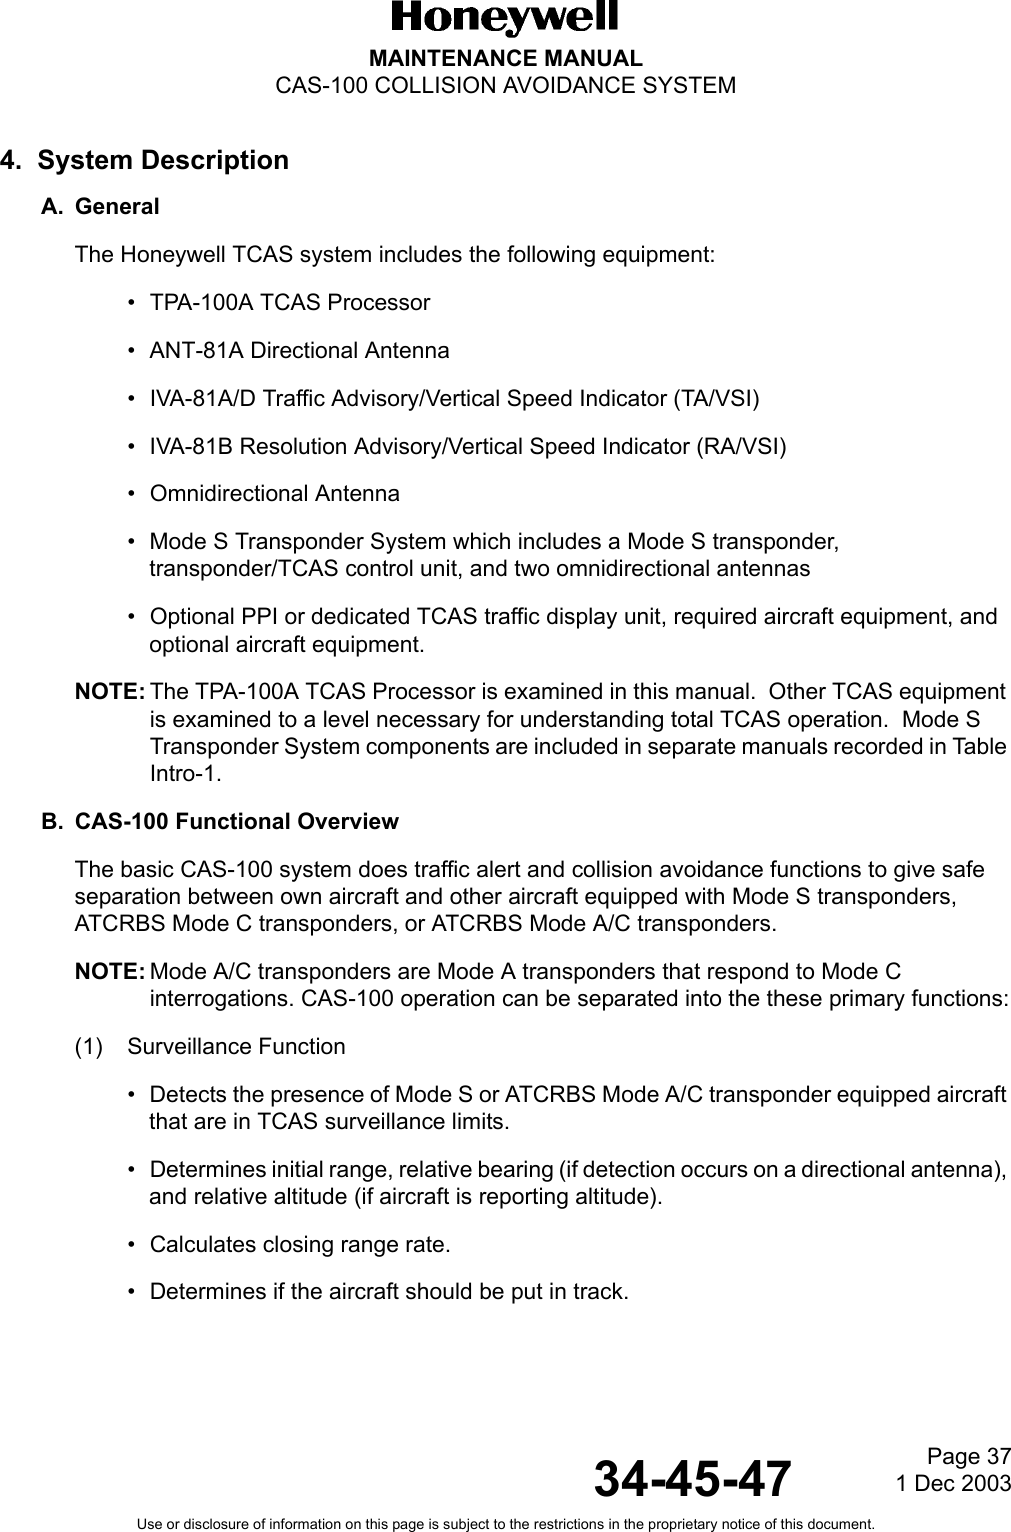 Page 37  1 Dec 200334-45-47MAINTENANCE MANUALCAS-100 COLLISION AVOIDANCE SYSTEMUse or disclosure of information on this page is subject to the restrictions in the proprietary notice of this document.4.  System DescriptionA. GeneralThe Honeywell TCAS system includes the following equipment:• TPA-100A TCAS Processor• ANT-81A Directional Antenna• IVA-81A/D Traffic Advisory/Vertical Speed Indicator (TA/VSI)• IVA-81B Resolution Advisory/Vertical Speed Indicator (RA/VSI)• Omnidirectional Antenna• Mode S Transponder System which includes a Mode S transponder, transponder/TCAS control unit, and two omnidirectional antennas• Optional PPI or dedicated TCAS traffic display unit, required aircraft equipment, and optional aircraft equipment.NOTE: The TPA-100A TCAS Processor is examined in this manual.  Other TCAS equipment is examined to a level necessary for understanding total TCAS operation.  Mode S Transponder System components are included in separate manuals recorded in Table Intro-1. B. CAS-100 Functional OverviewThe basic CAS-100 system does traffic alert and collision avoidance functions to give safe separation between own aircraft and other aircraft equipped with Mode S transponders, ATCRBS Mode C transponders, or ATCRBS Mode A/C transponders.NOTE: Mode A/C transponders are Mode A transponders that respond to Mode C interrogations. CAS-100 operation can be separated into the these primary functions:(1) Surveillance Function• Detects the presence of Mode S or ATCRBS Mode A/C transponder equipped aircraft that are in TCAS surveillance limits.• Determines initial range, relative bearing (if detection occurs on a directional antenna), and relative altitude (if aircraft is reporting altitude).• Calculates closing range rate.• Determines if the aircraft should be put in track.